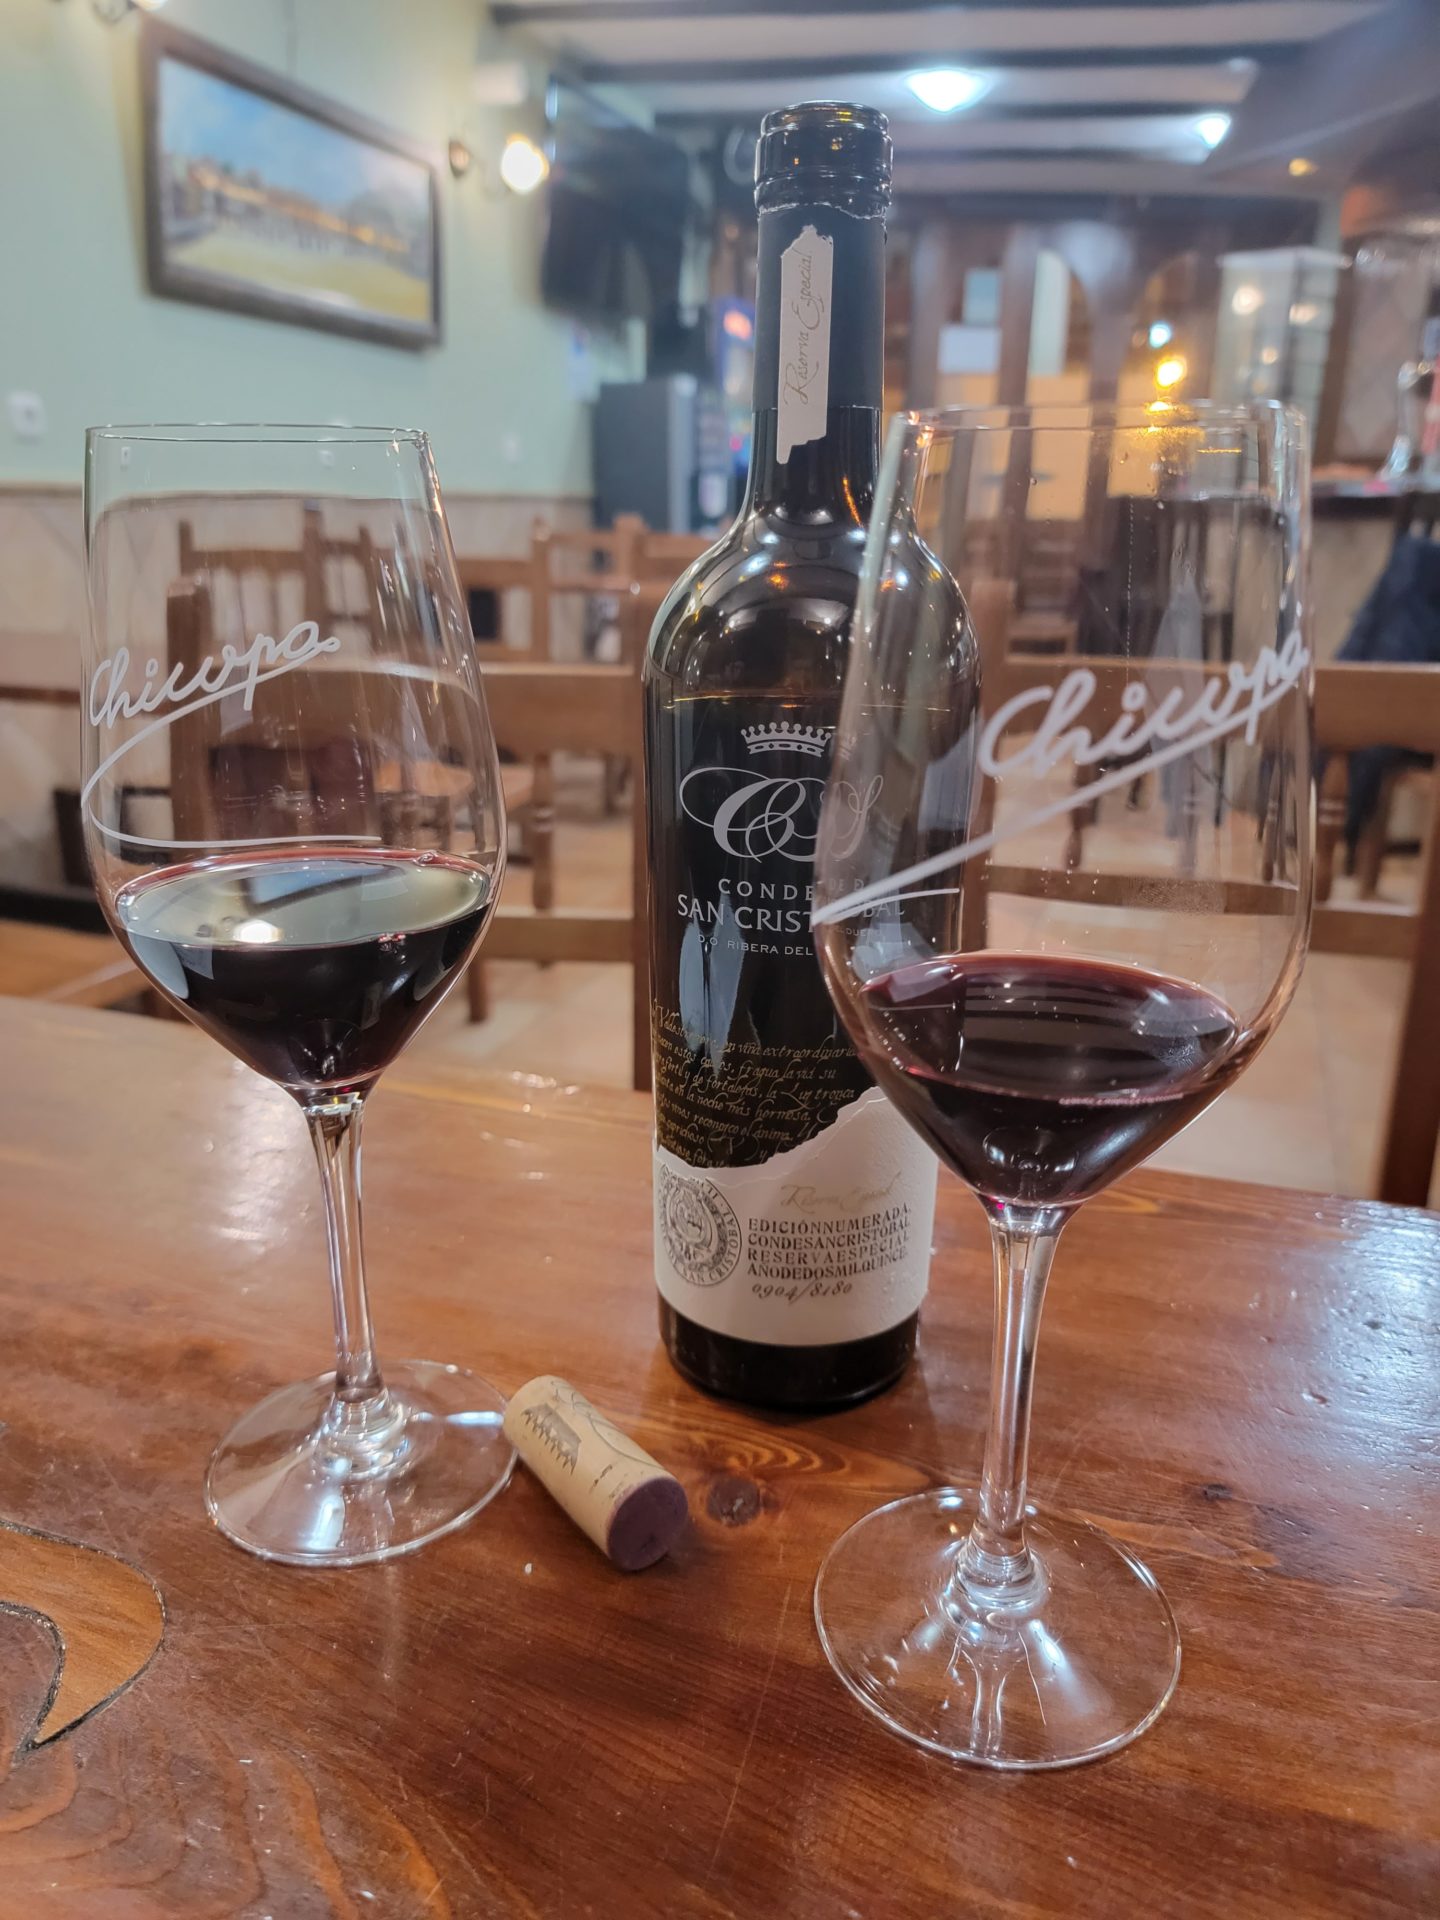 a bottle of wine next to wine glasses